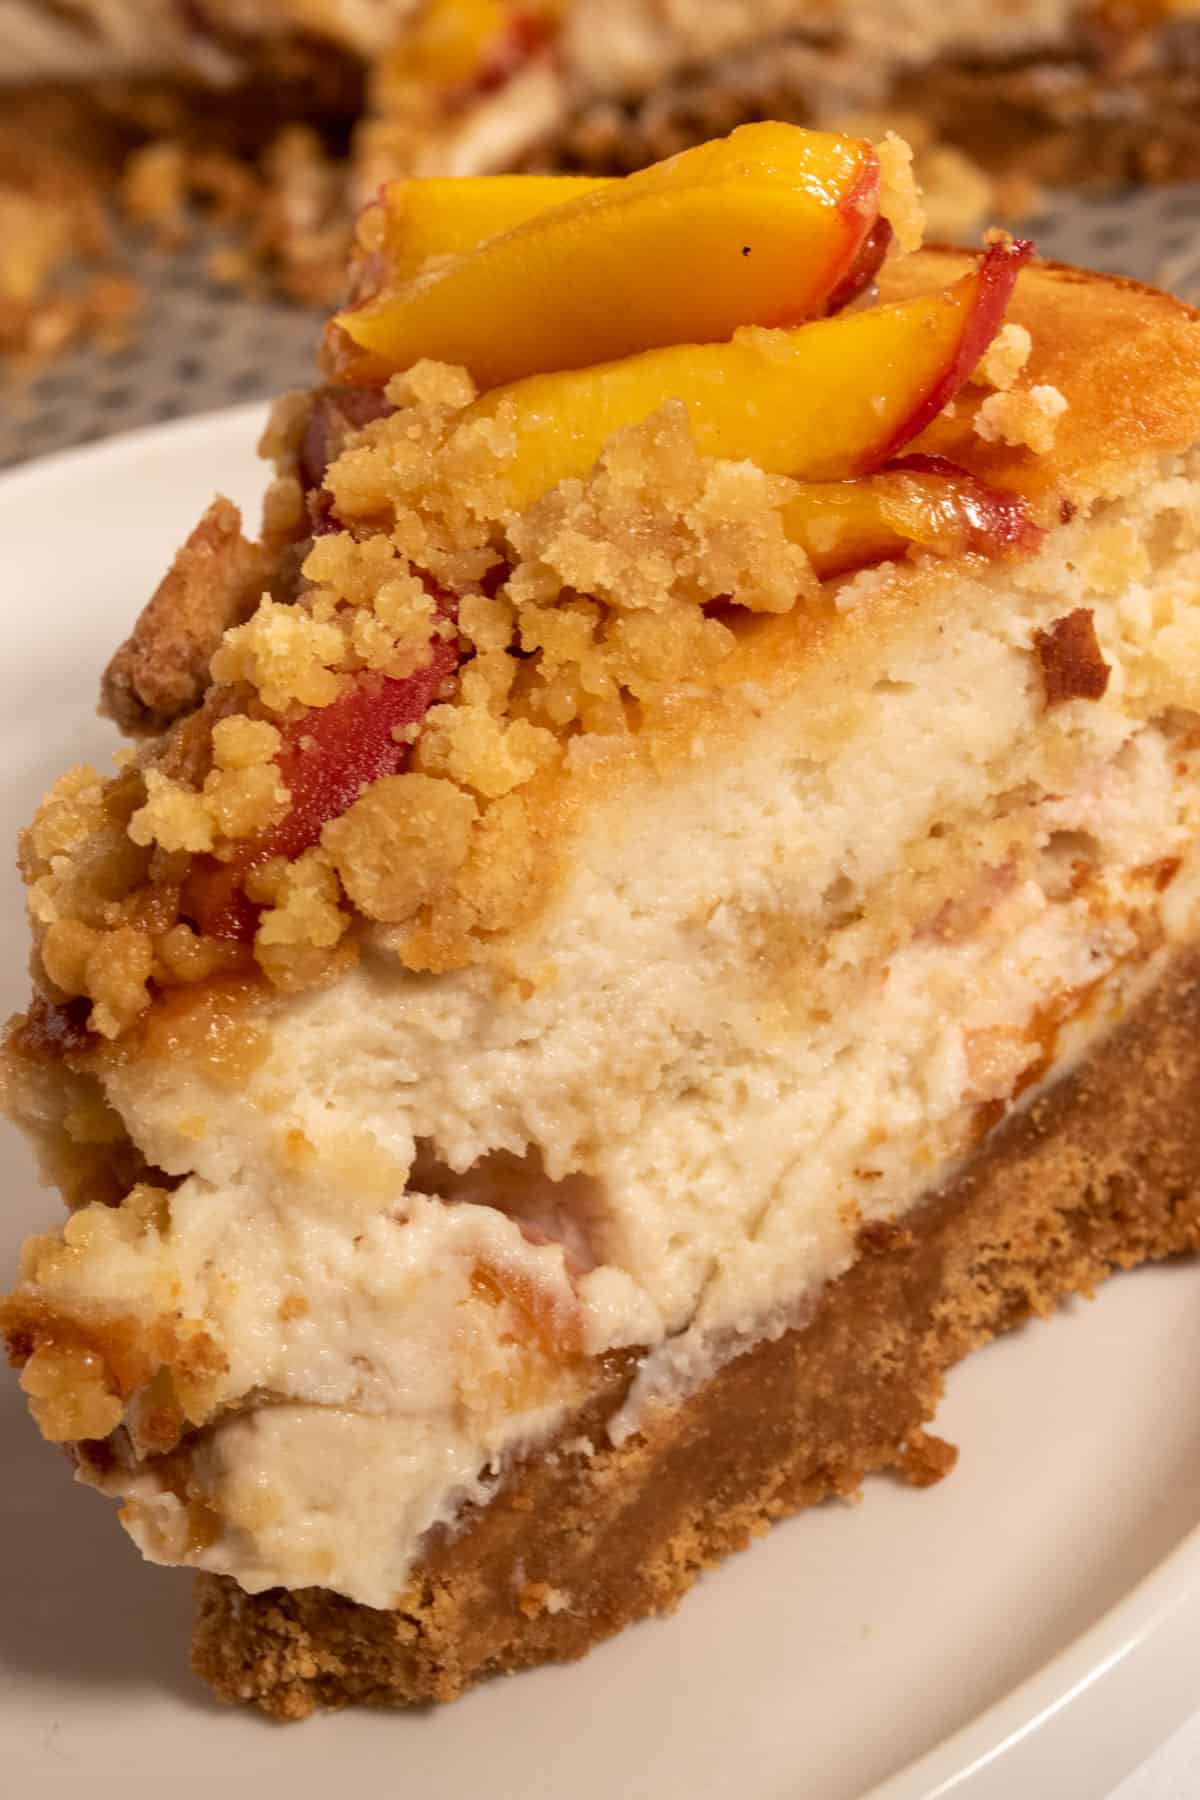 A slice of vegan peach cobbler cheesecake looking creamy and golden in the lighting. There are many caramelized peaches on top. 